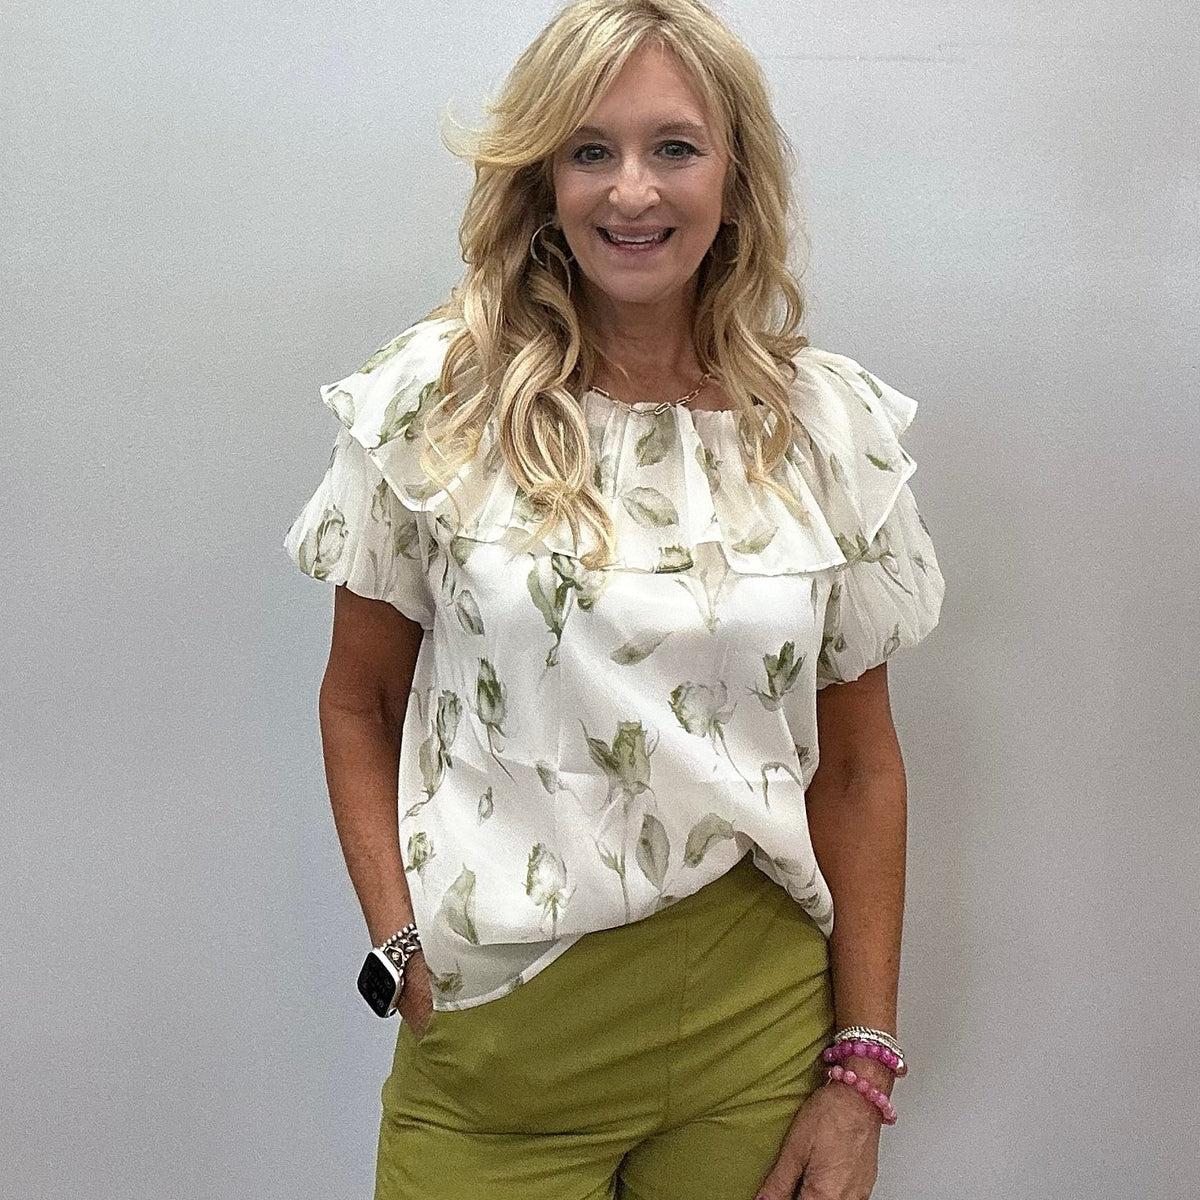 Andrea Trouser Shorts in Green